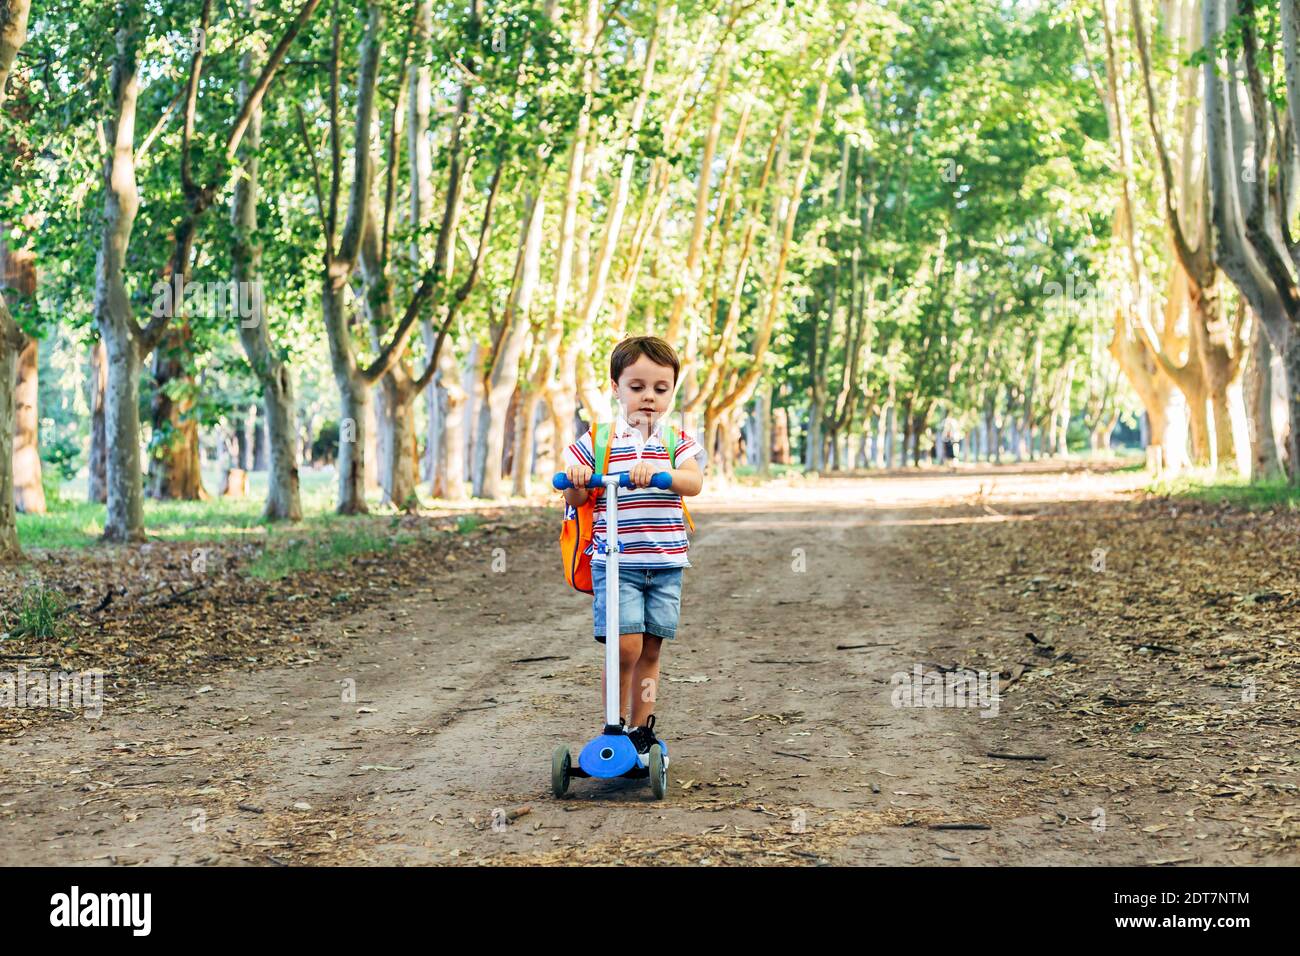 Smiling child on kick scooter in the countryside. Outdoor activity for children on safe rural street. Kids learn to skate roller board. Little boy wit Stock Photo